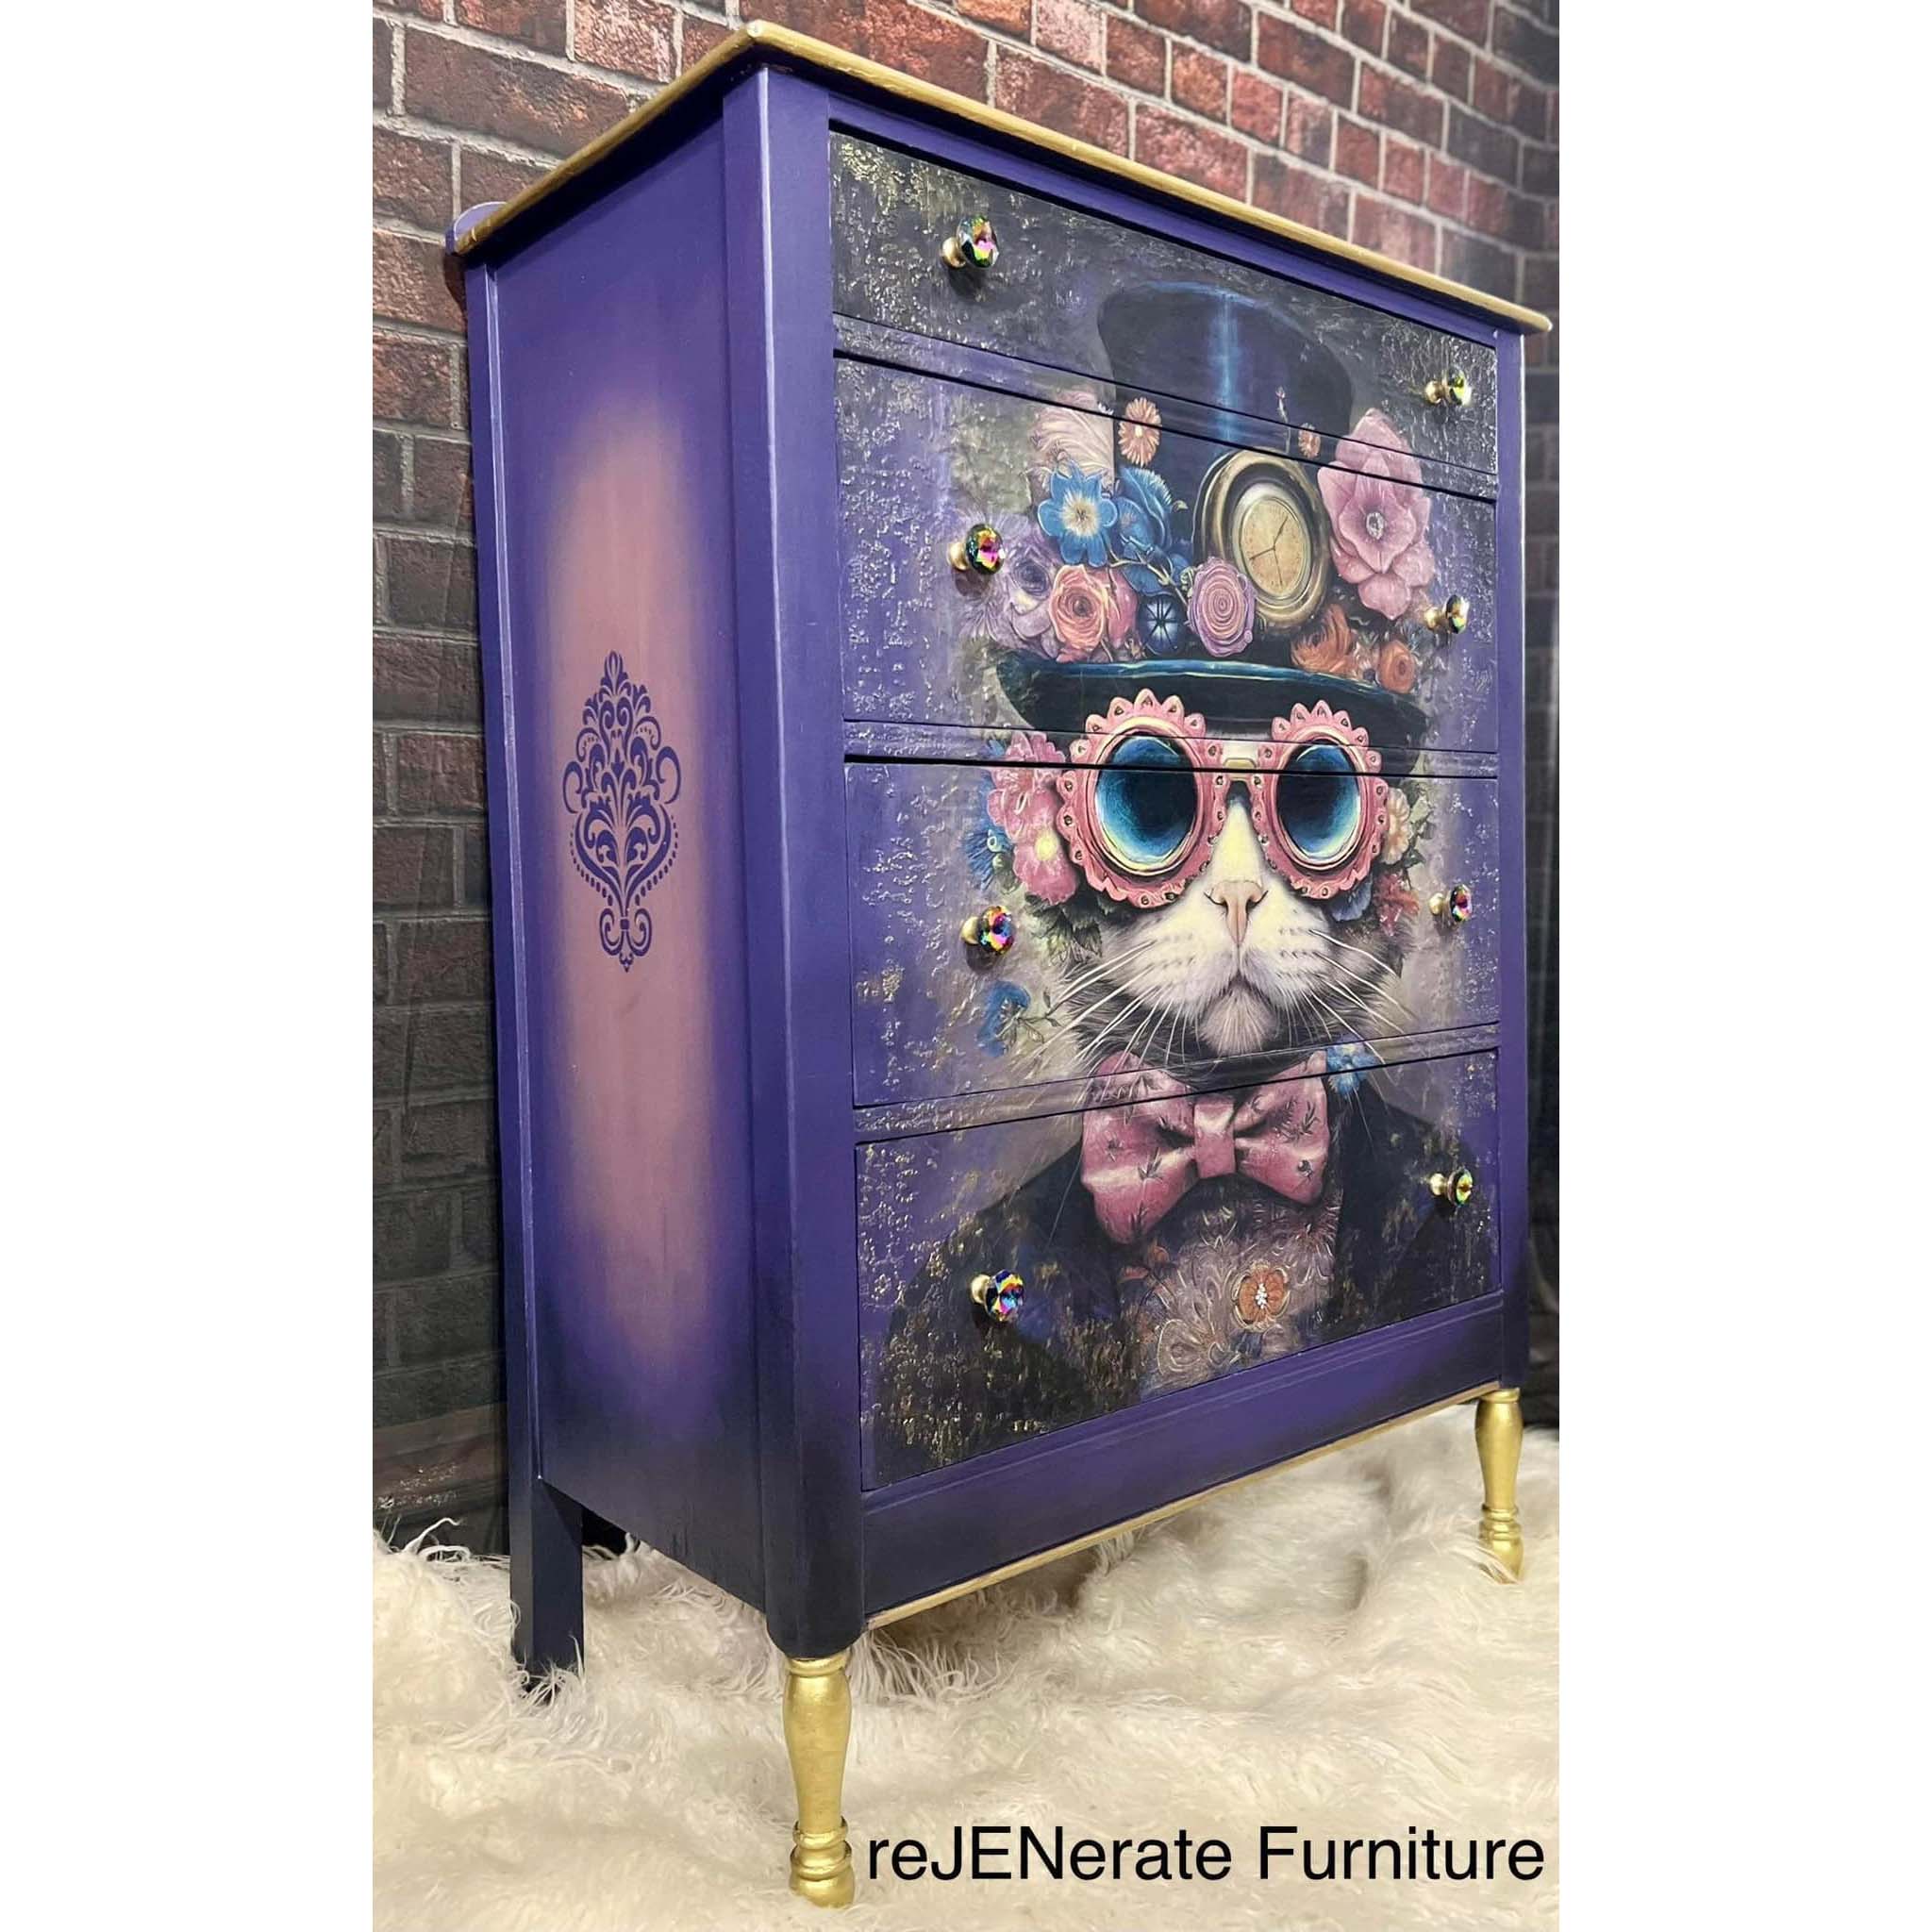 A vintage 4-drawer chest dresser refurbished by reJENerate Furniture is painted purple with a dark ombre blend at the bottom and features Whimsykel's Dapper Dan tissue paper covering the drawers. 